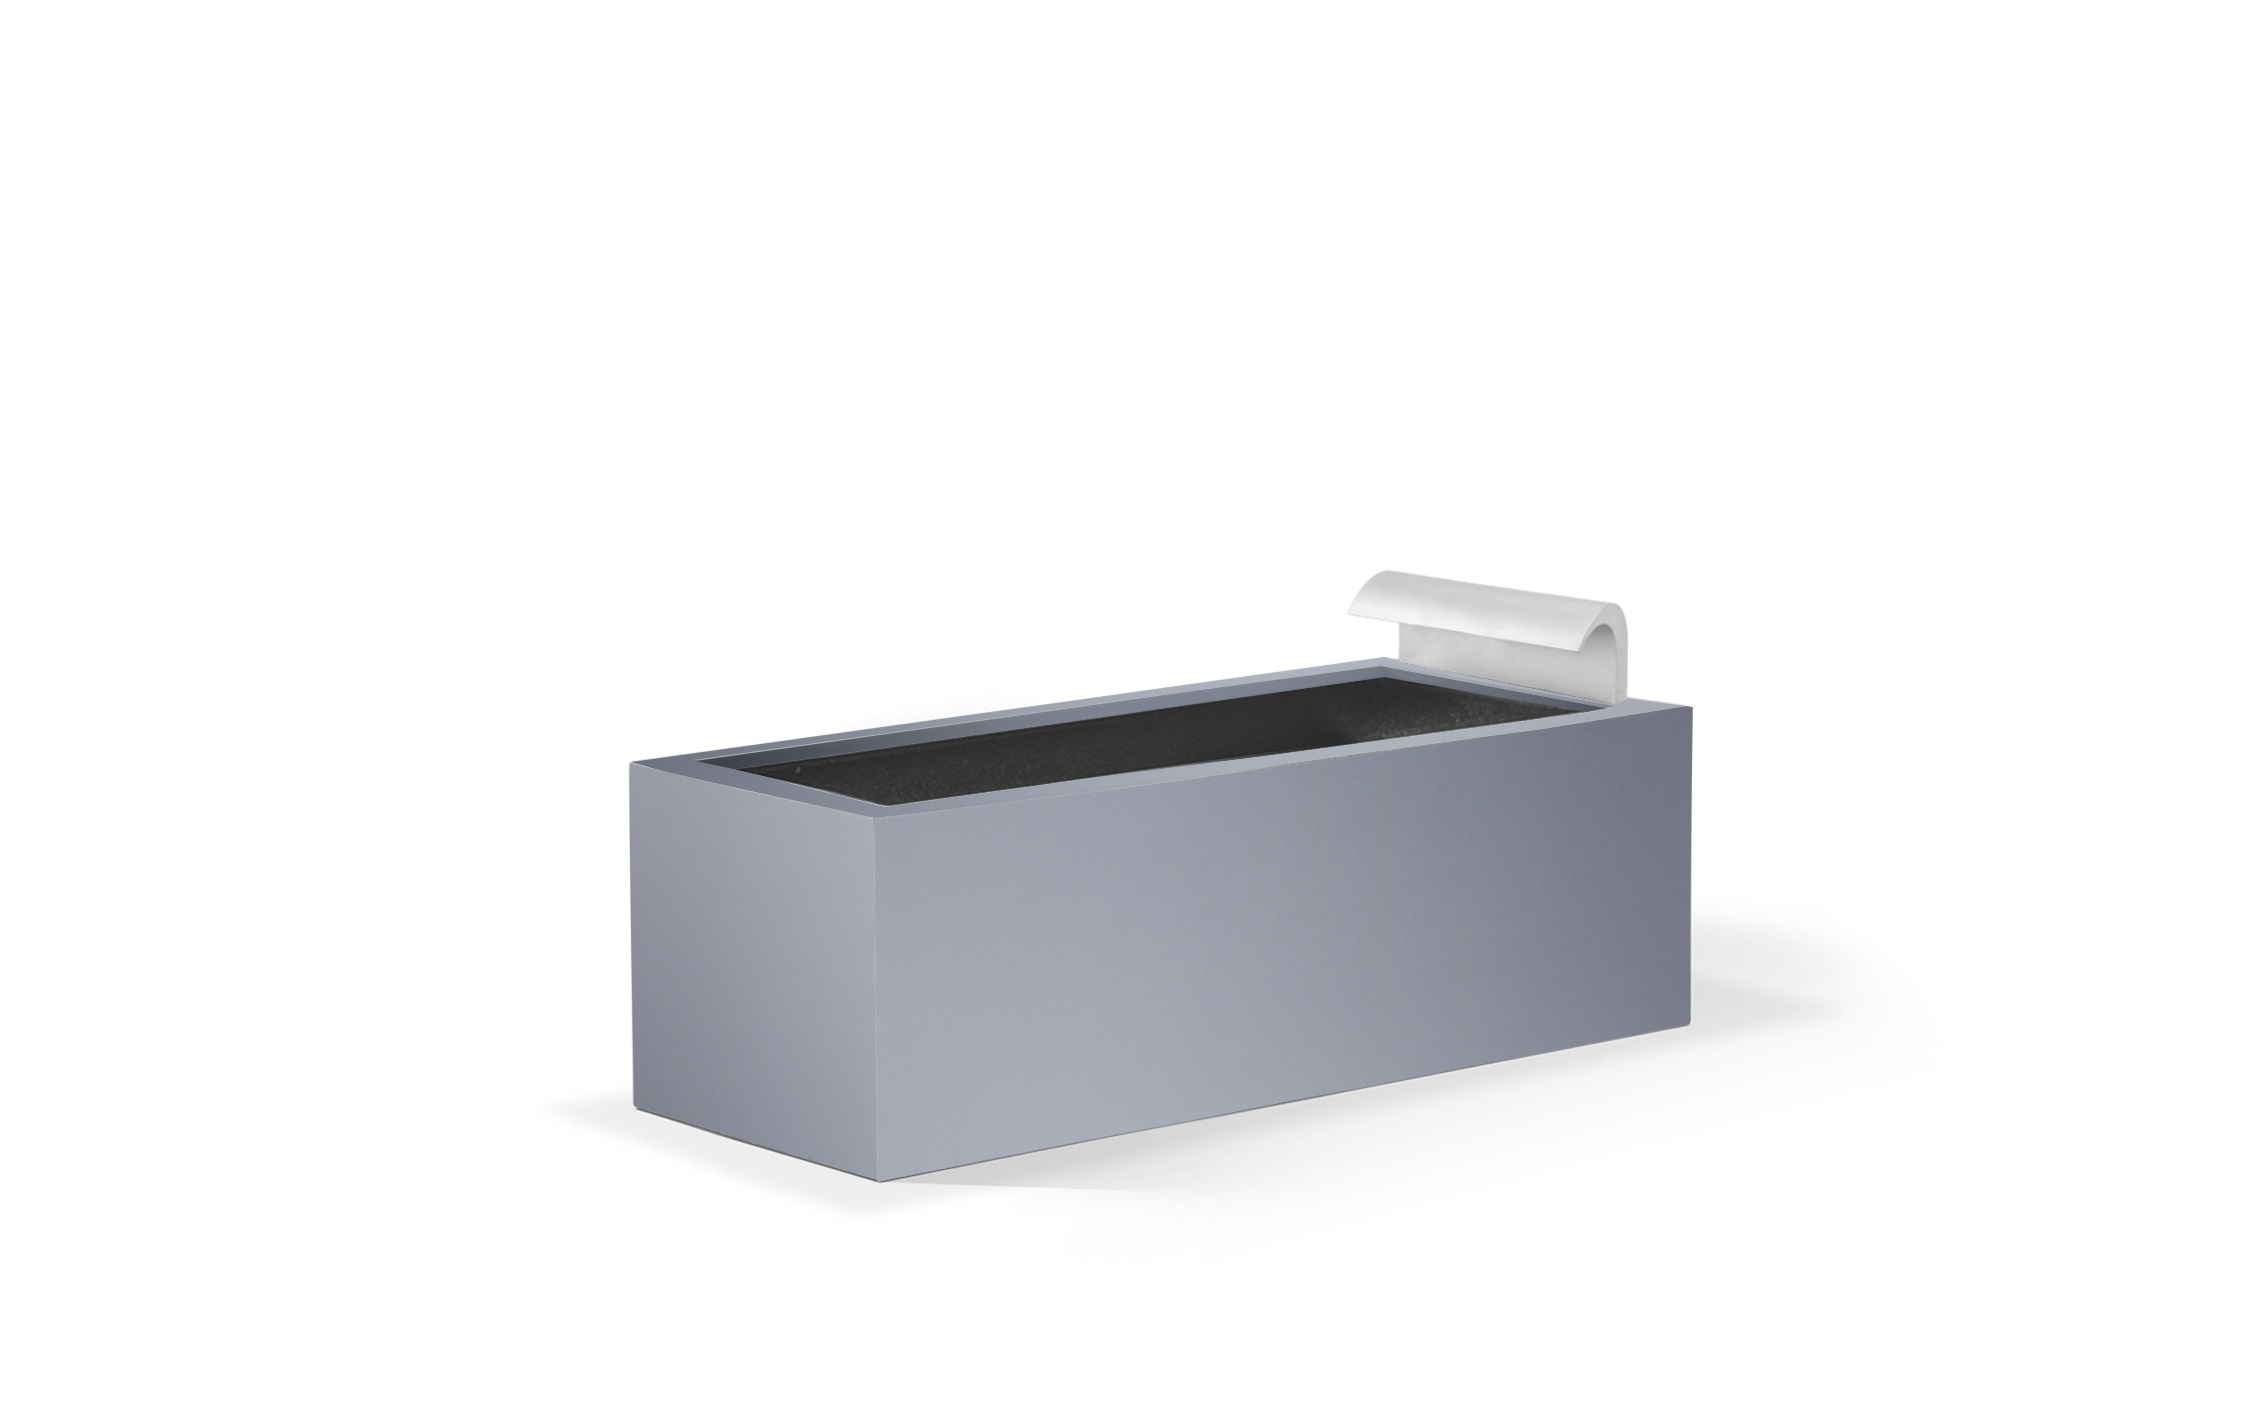 AQUA LINEA water trough set with waterfall inlet and pump